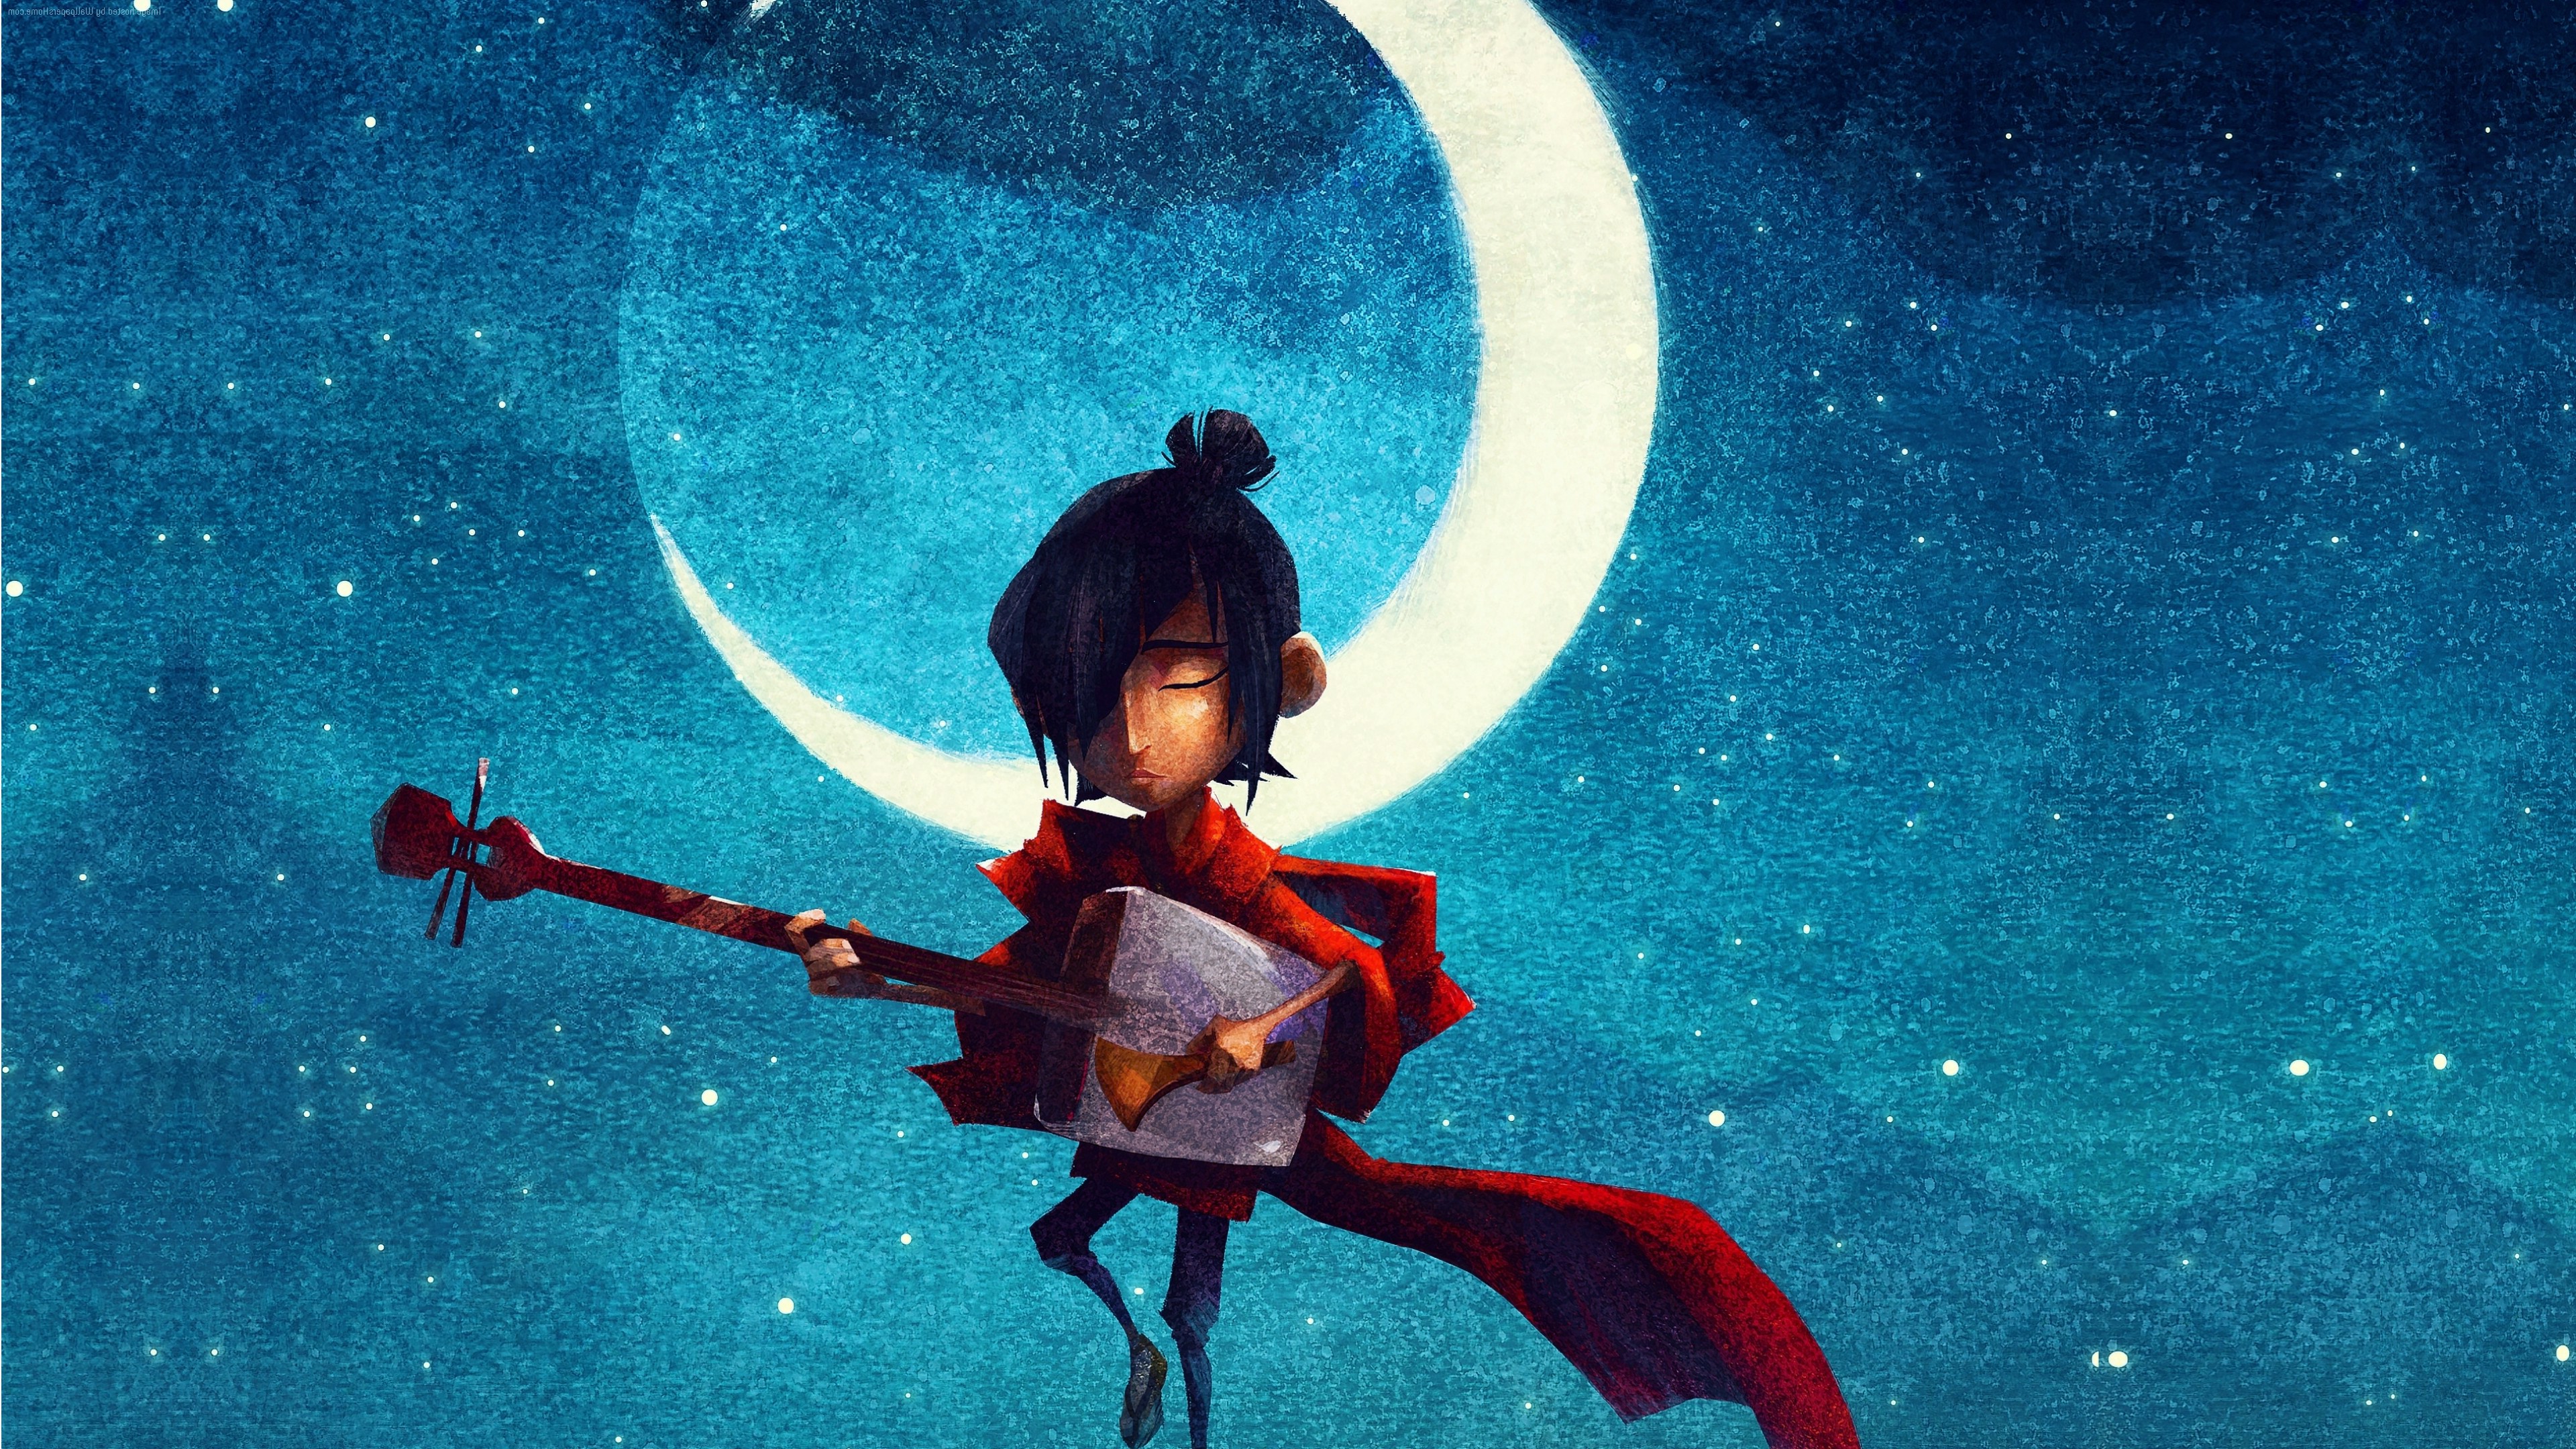 Kubo And The Two Strings Wallpapers